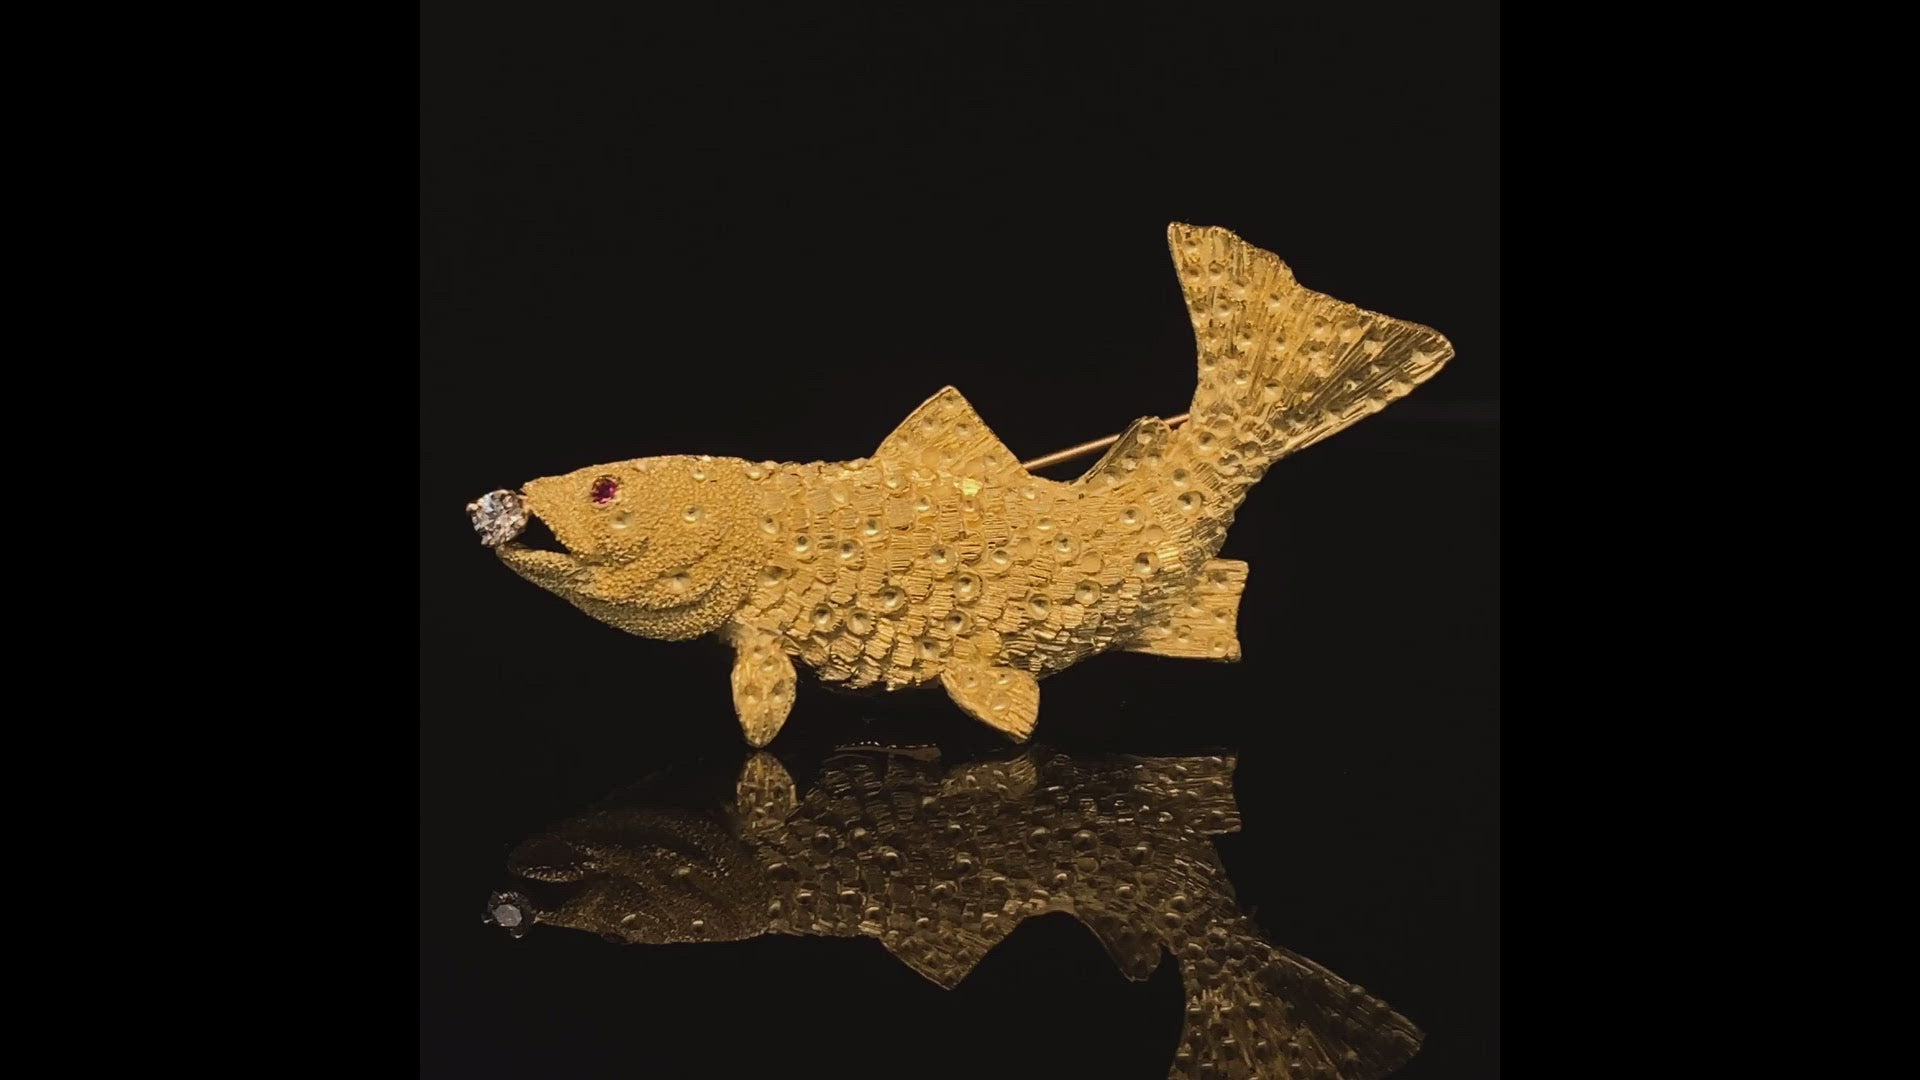 Fish, Rainbow Speckled Trout with One Diamond – 18K Gold Animal